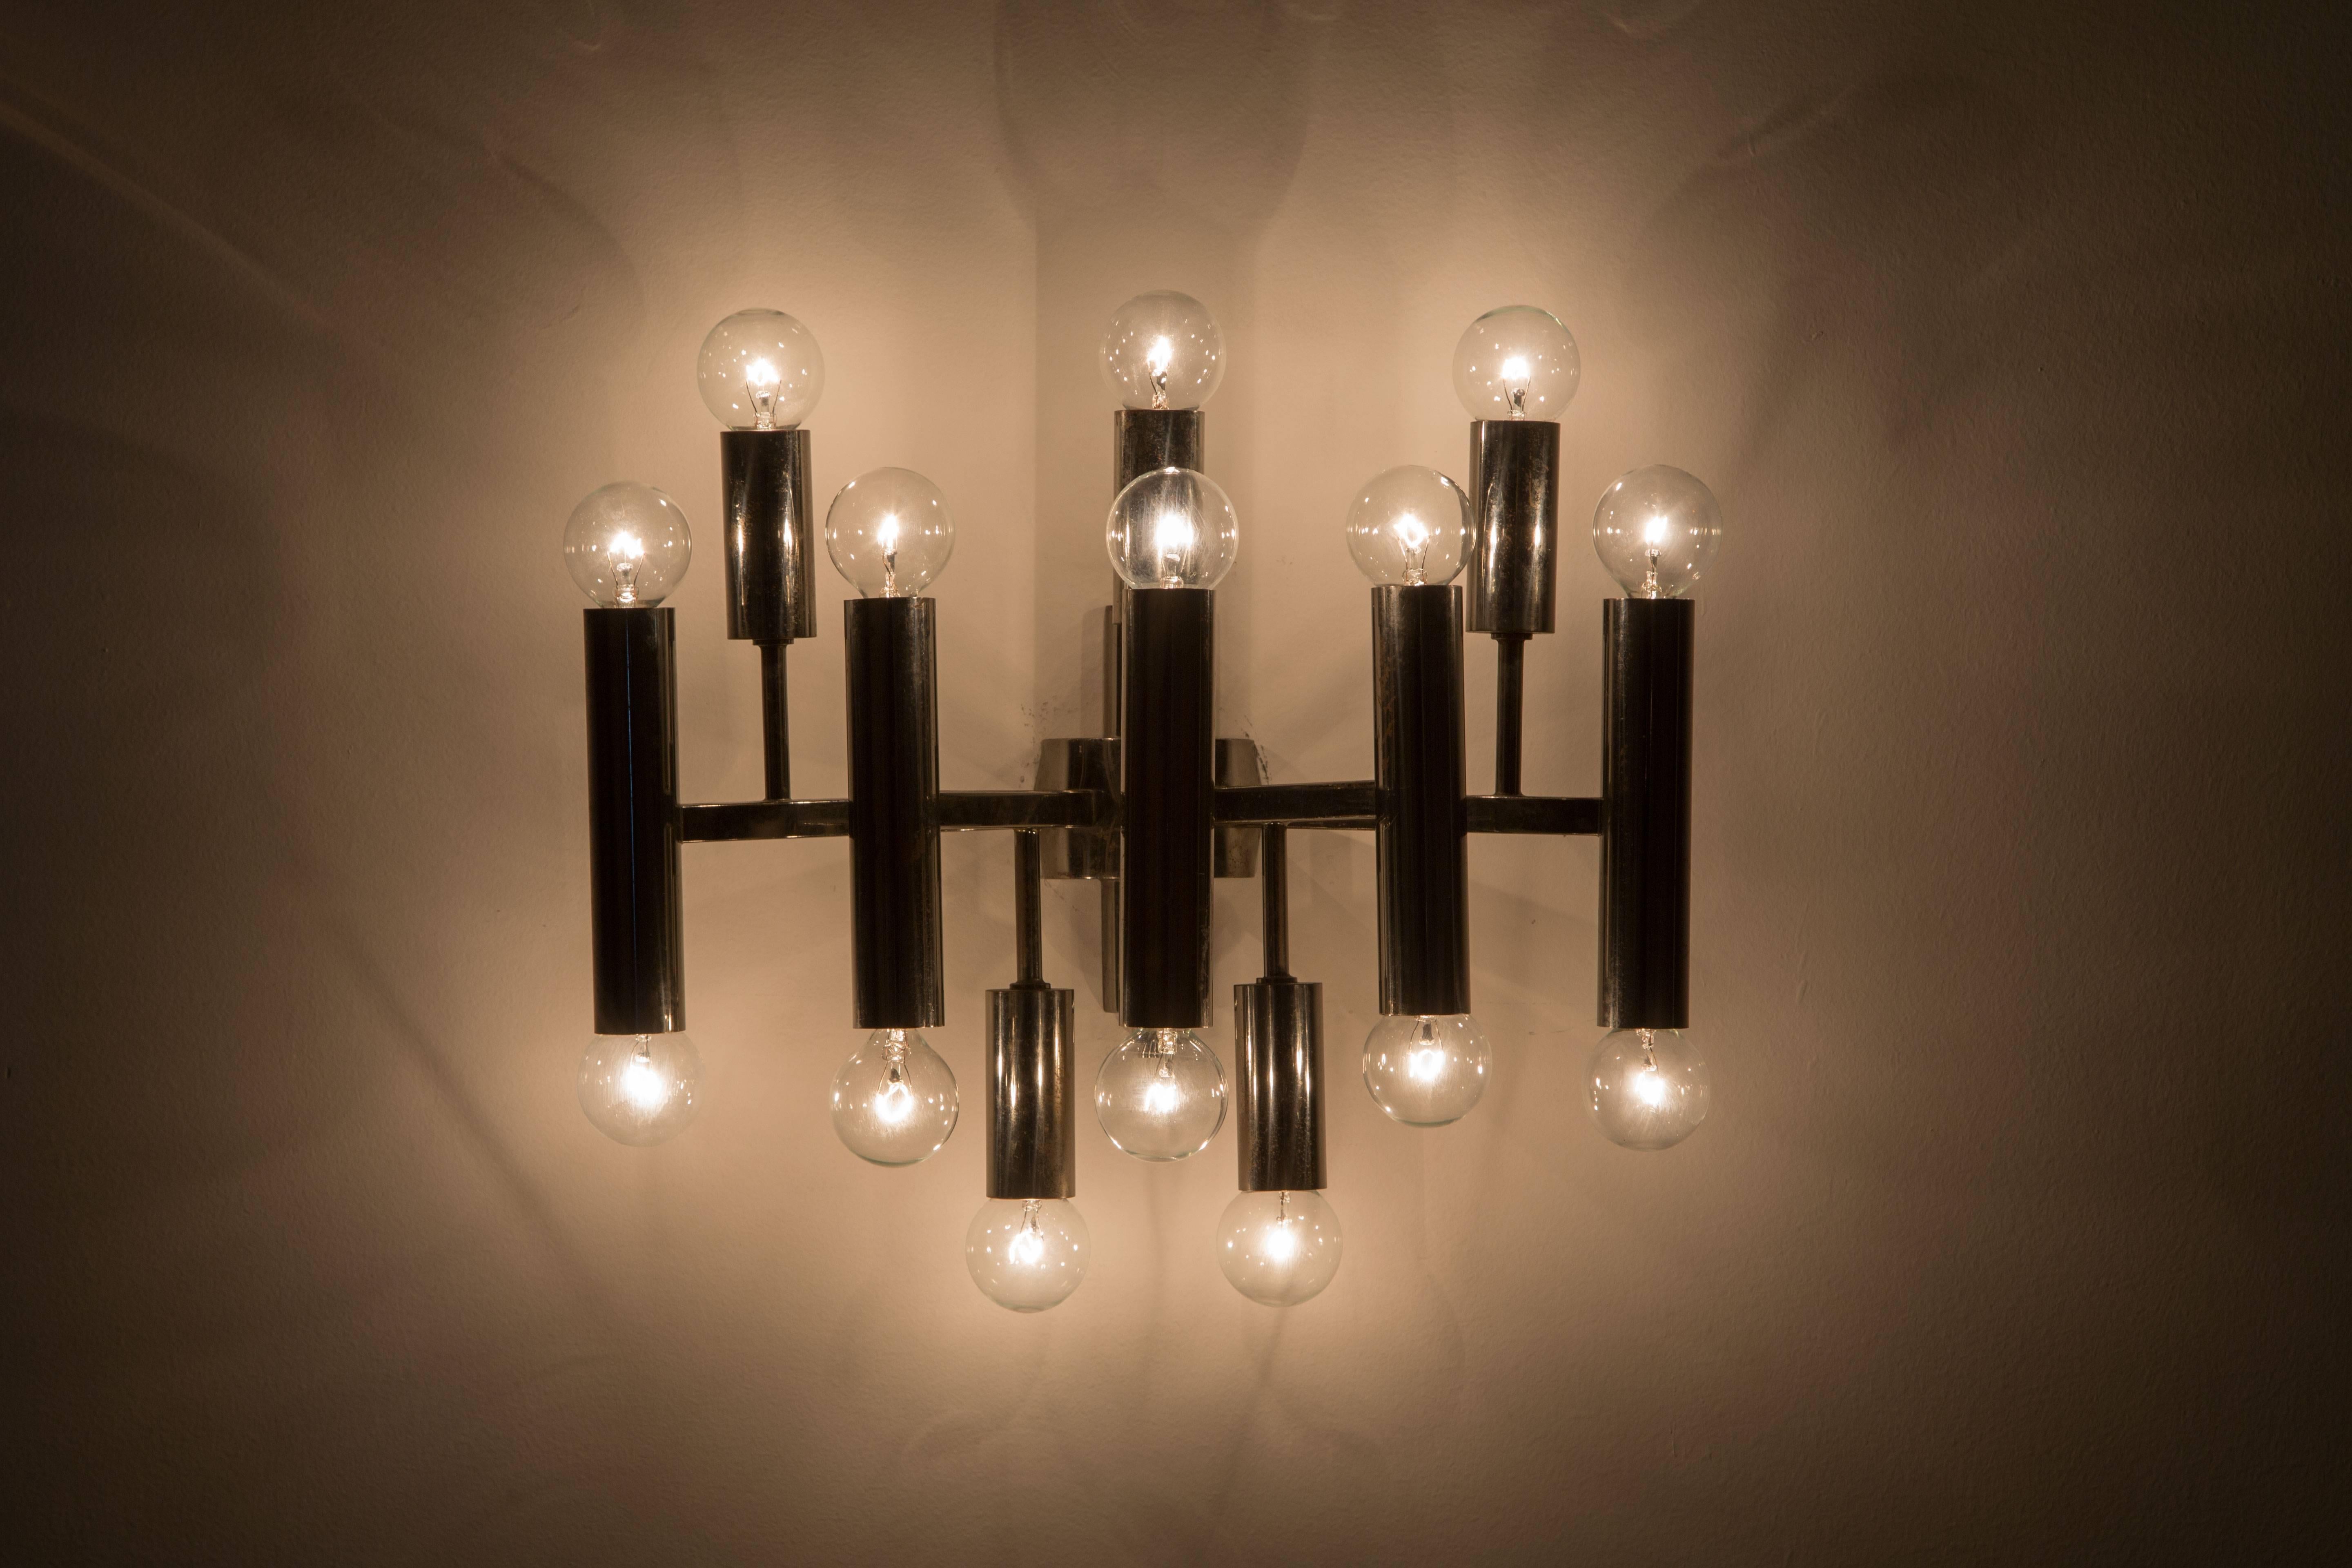 Pair of multi-Directional sconces plated in black nickel. Made in Italy in the 1960s. Rewired for US junction boxes. Each sconce takes fifteen E14 15w maximum European candelabra bulbs.